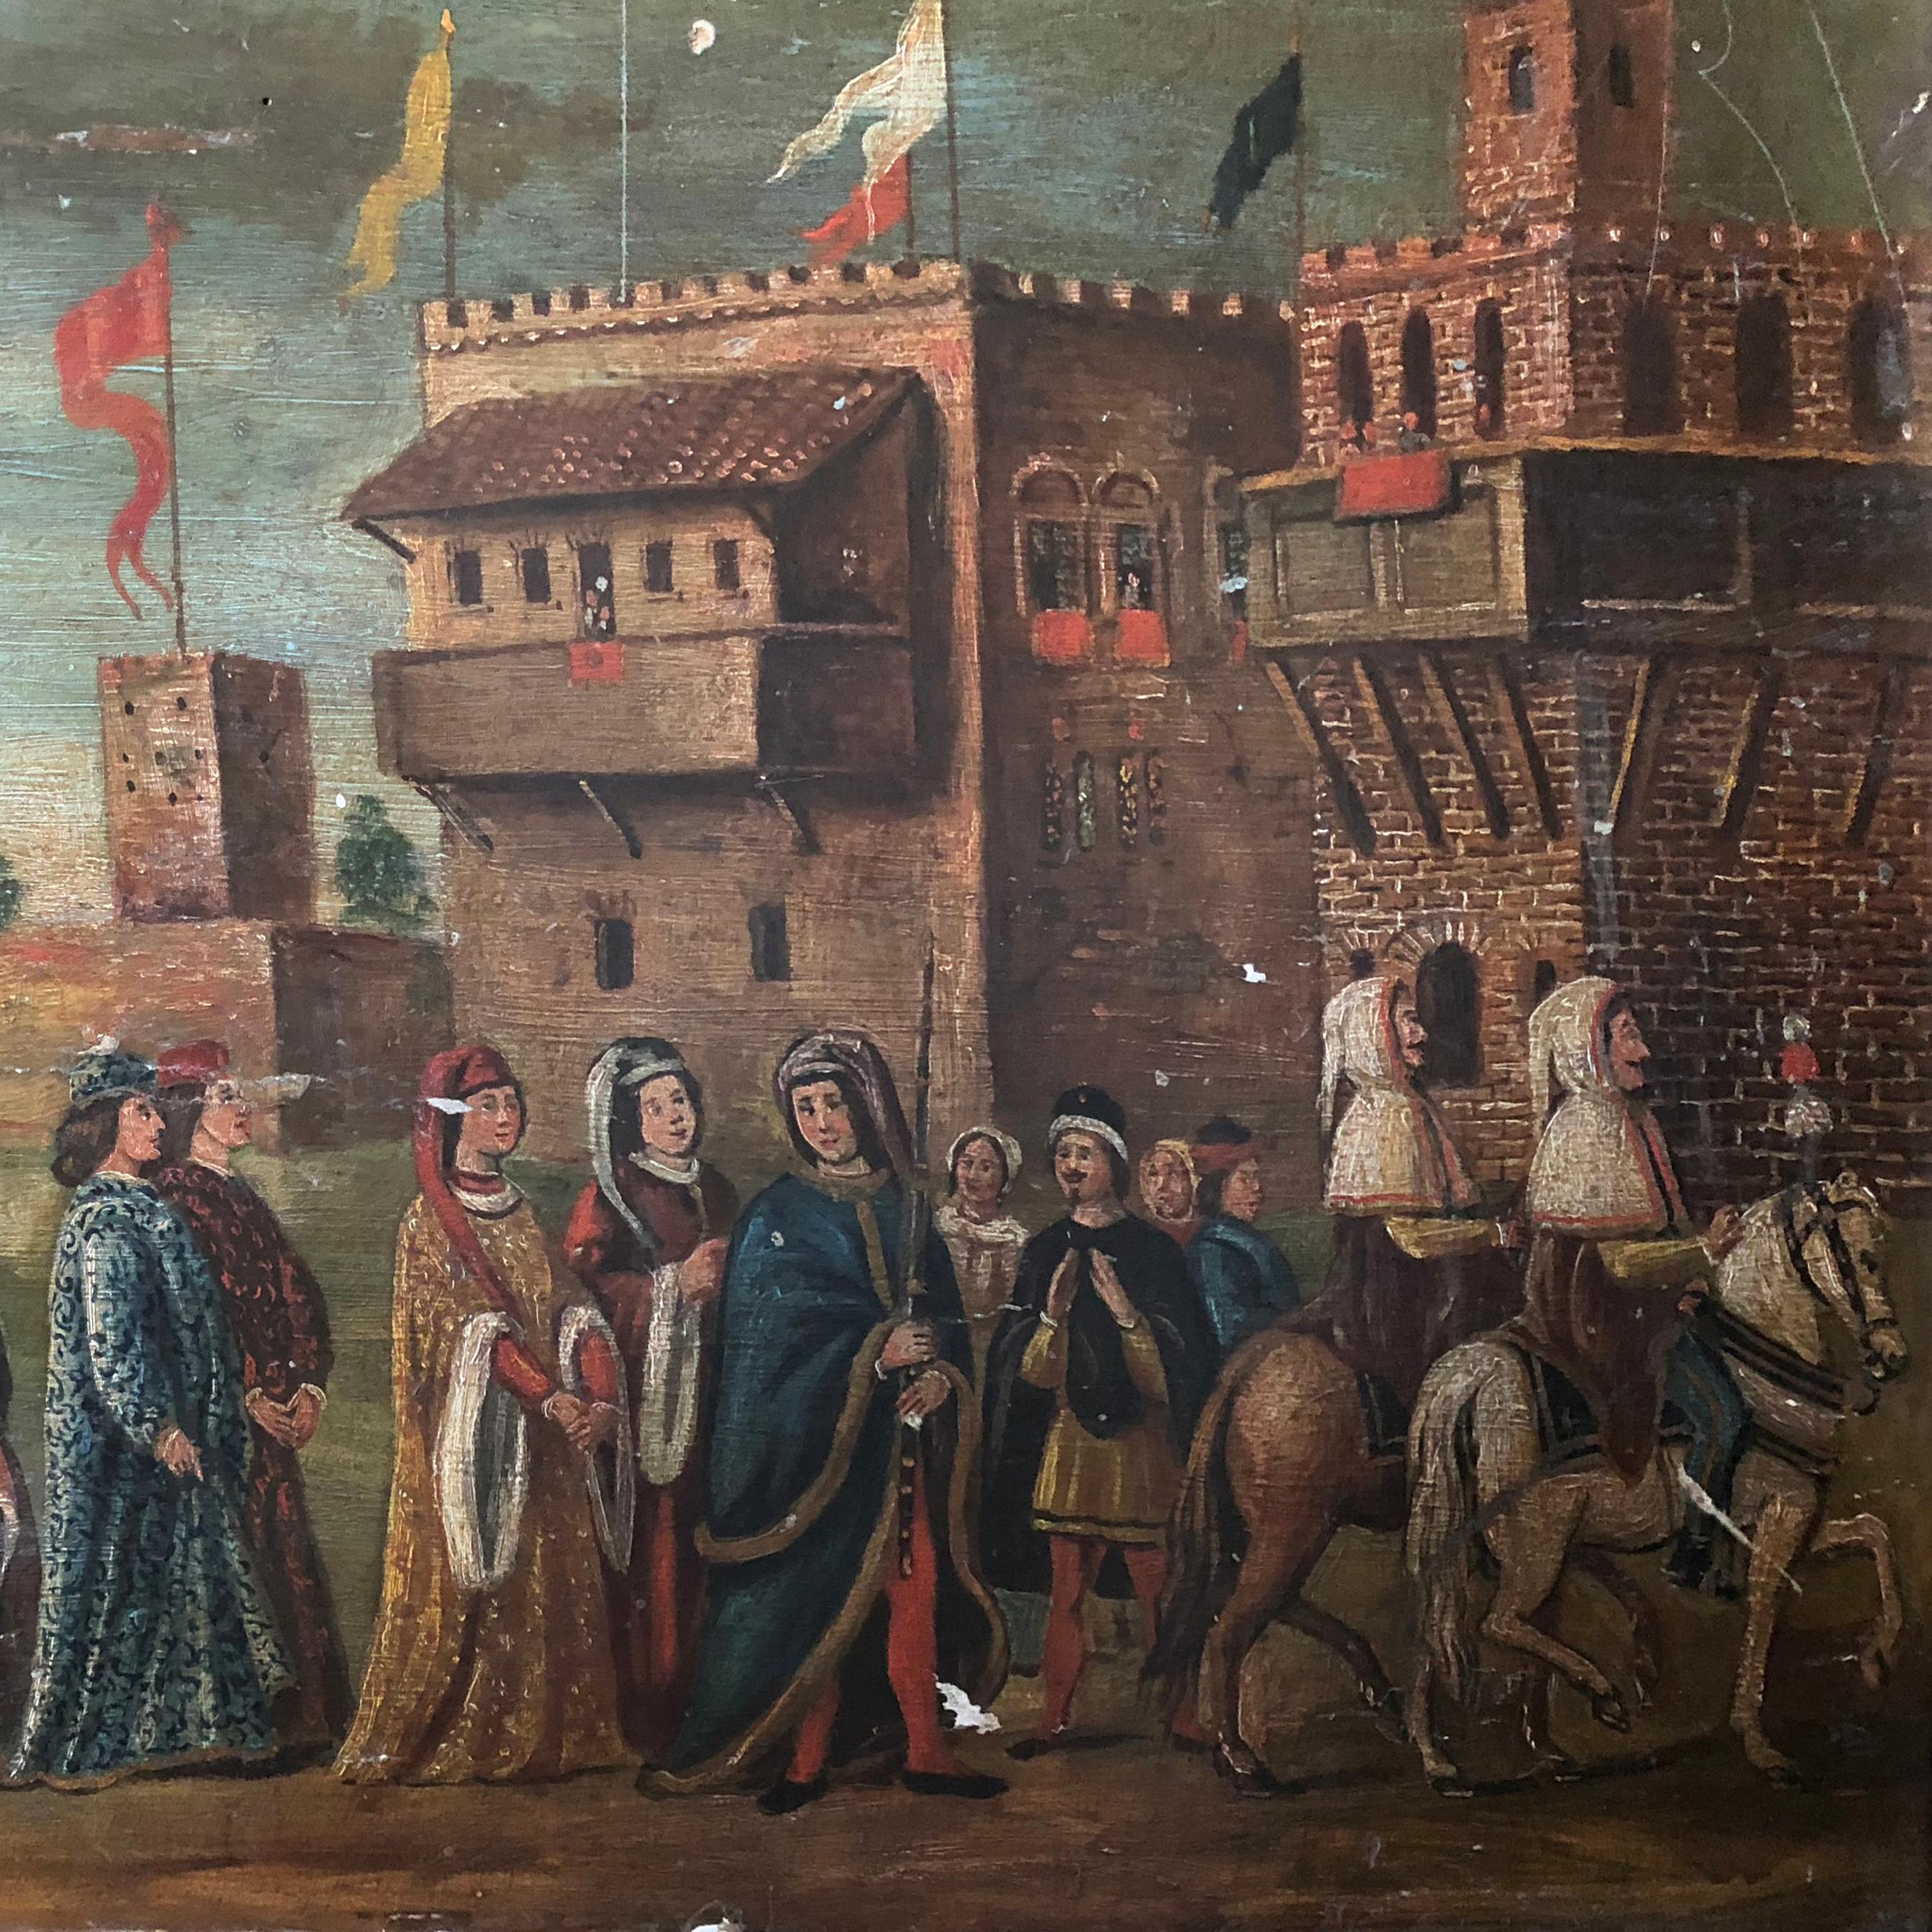 The Doge of Venice 15th Century Italian Renaissance Cassone

The painting on the front panel of the cassone shows the Doge parading along the banks of Medieval Venice; he is wearing his robes, Ermine cape and the jeweled red Phrygian cap on his